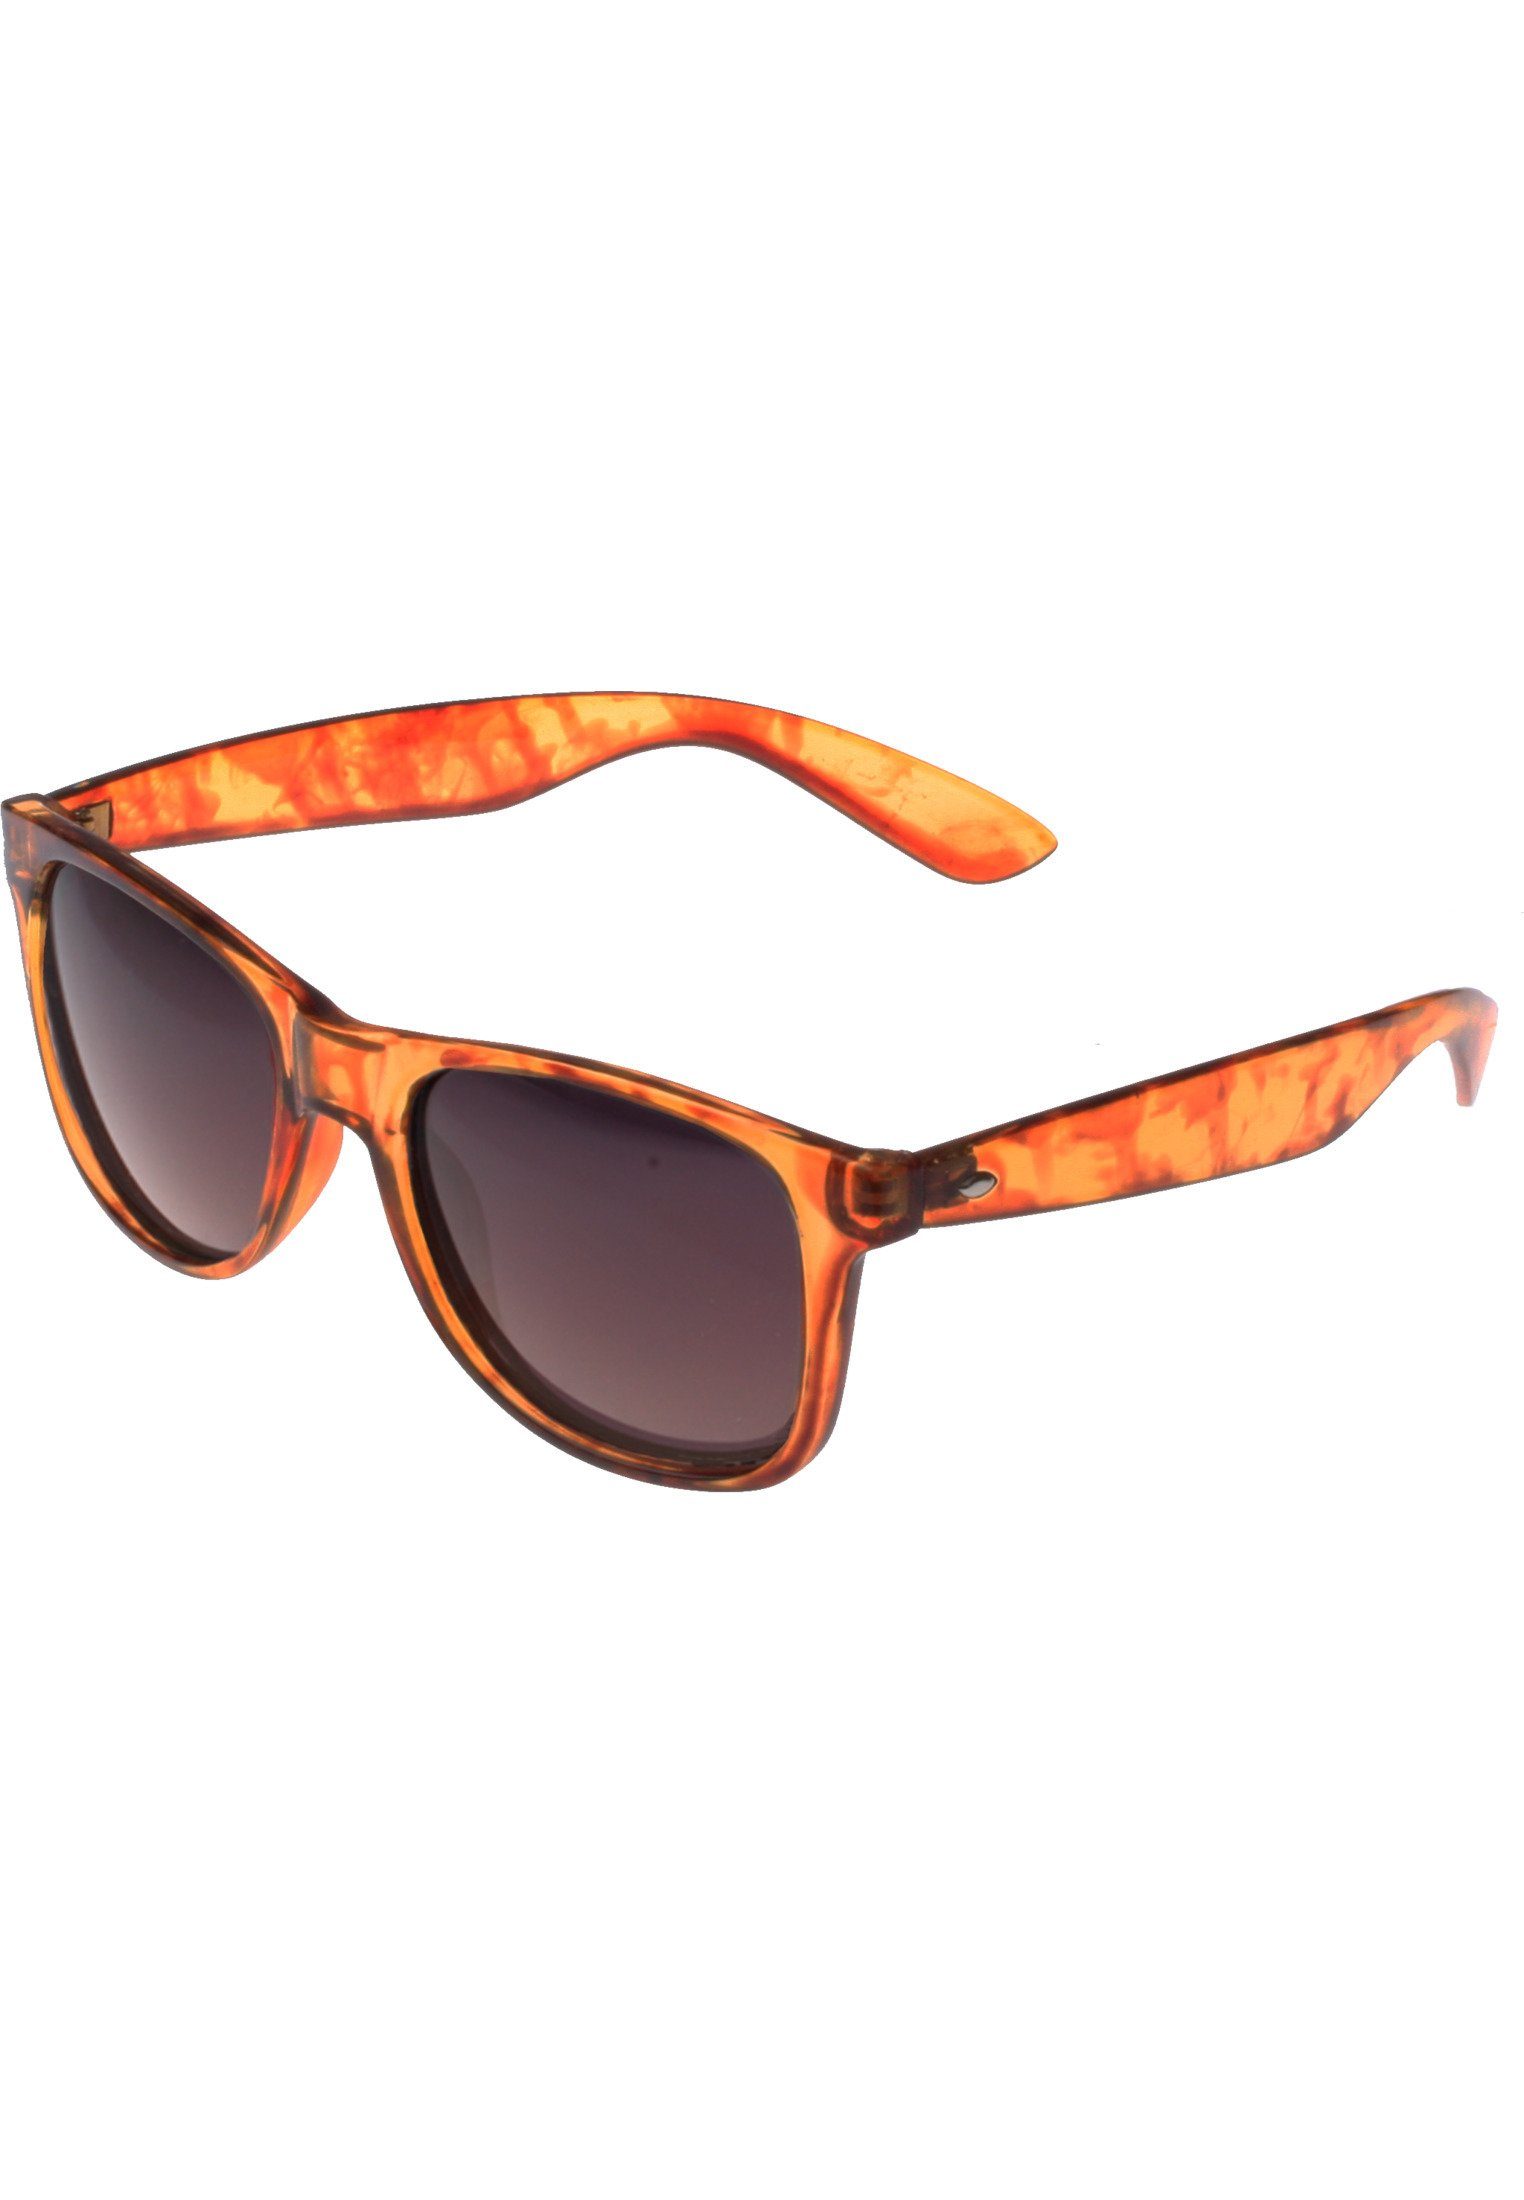 MSTRDS Sonnenbrille Accessoires amber GStwo Groove Shades